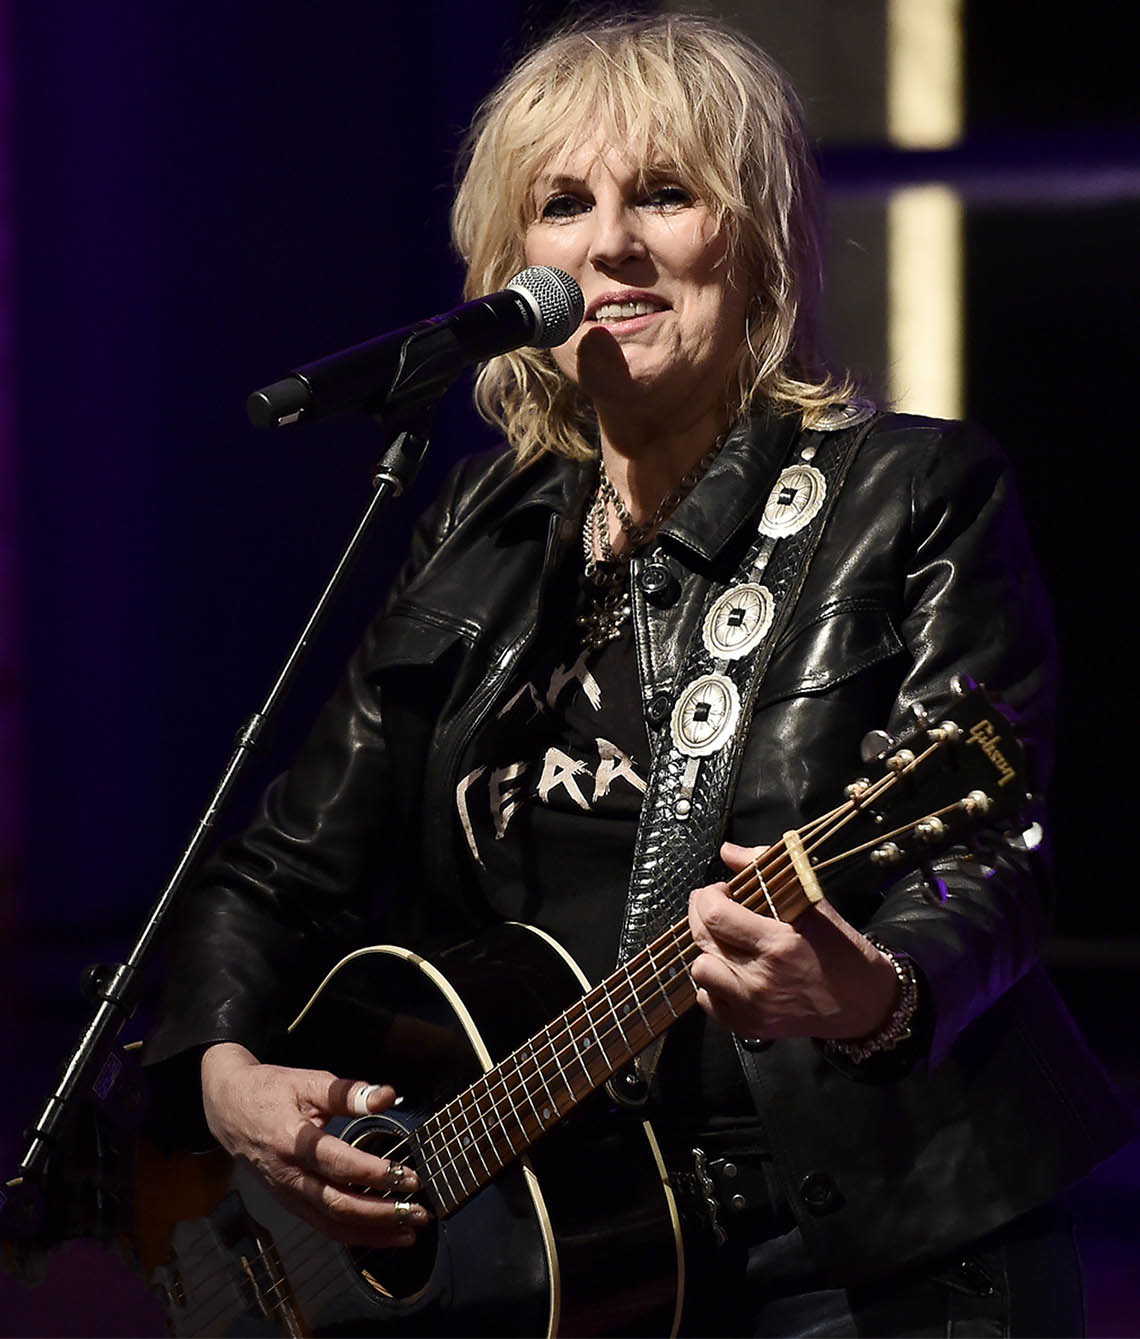 lucinda williams holding a guitar in front of microphone